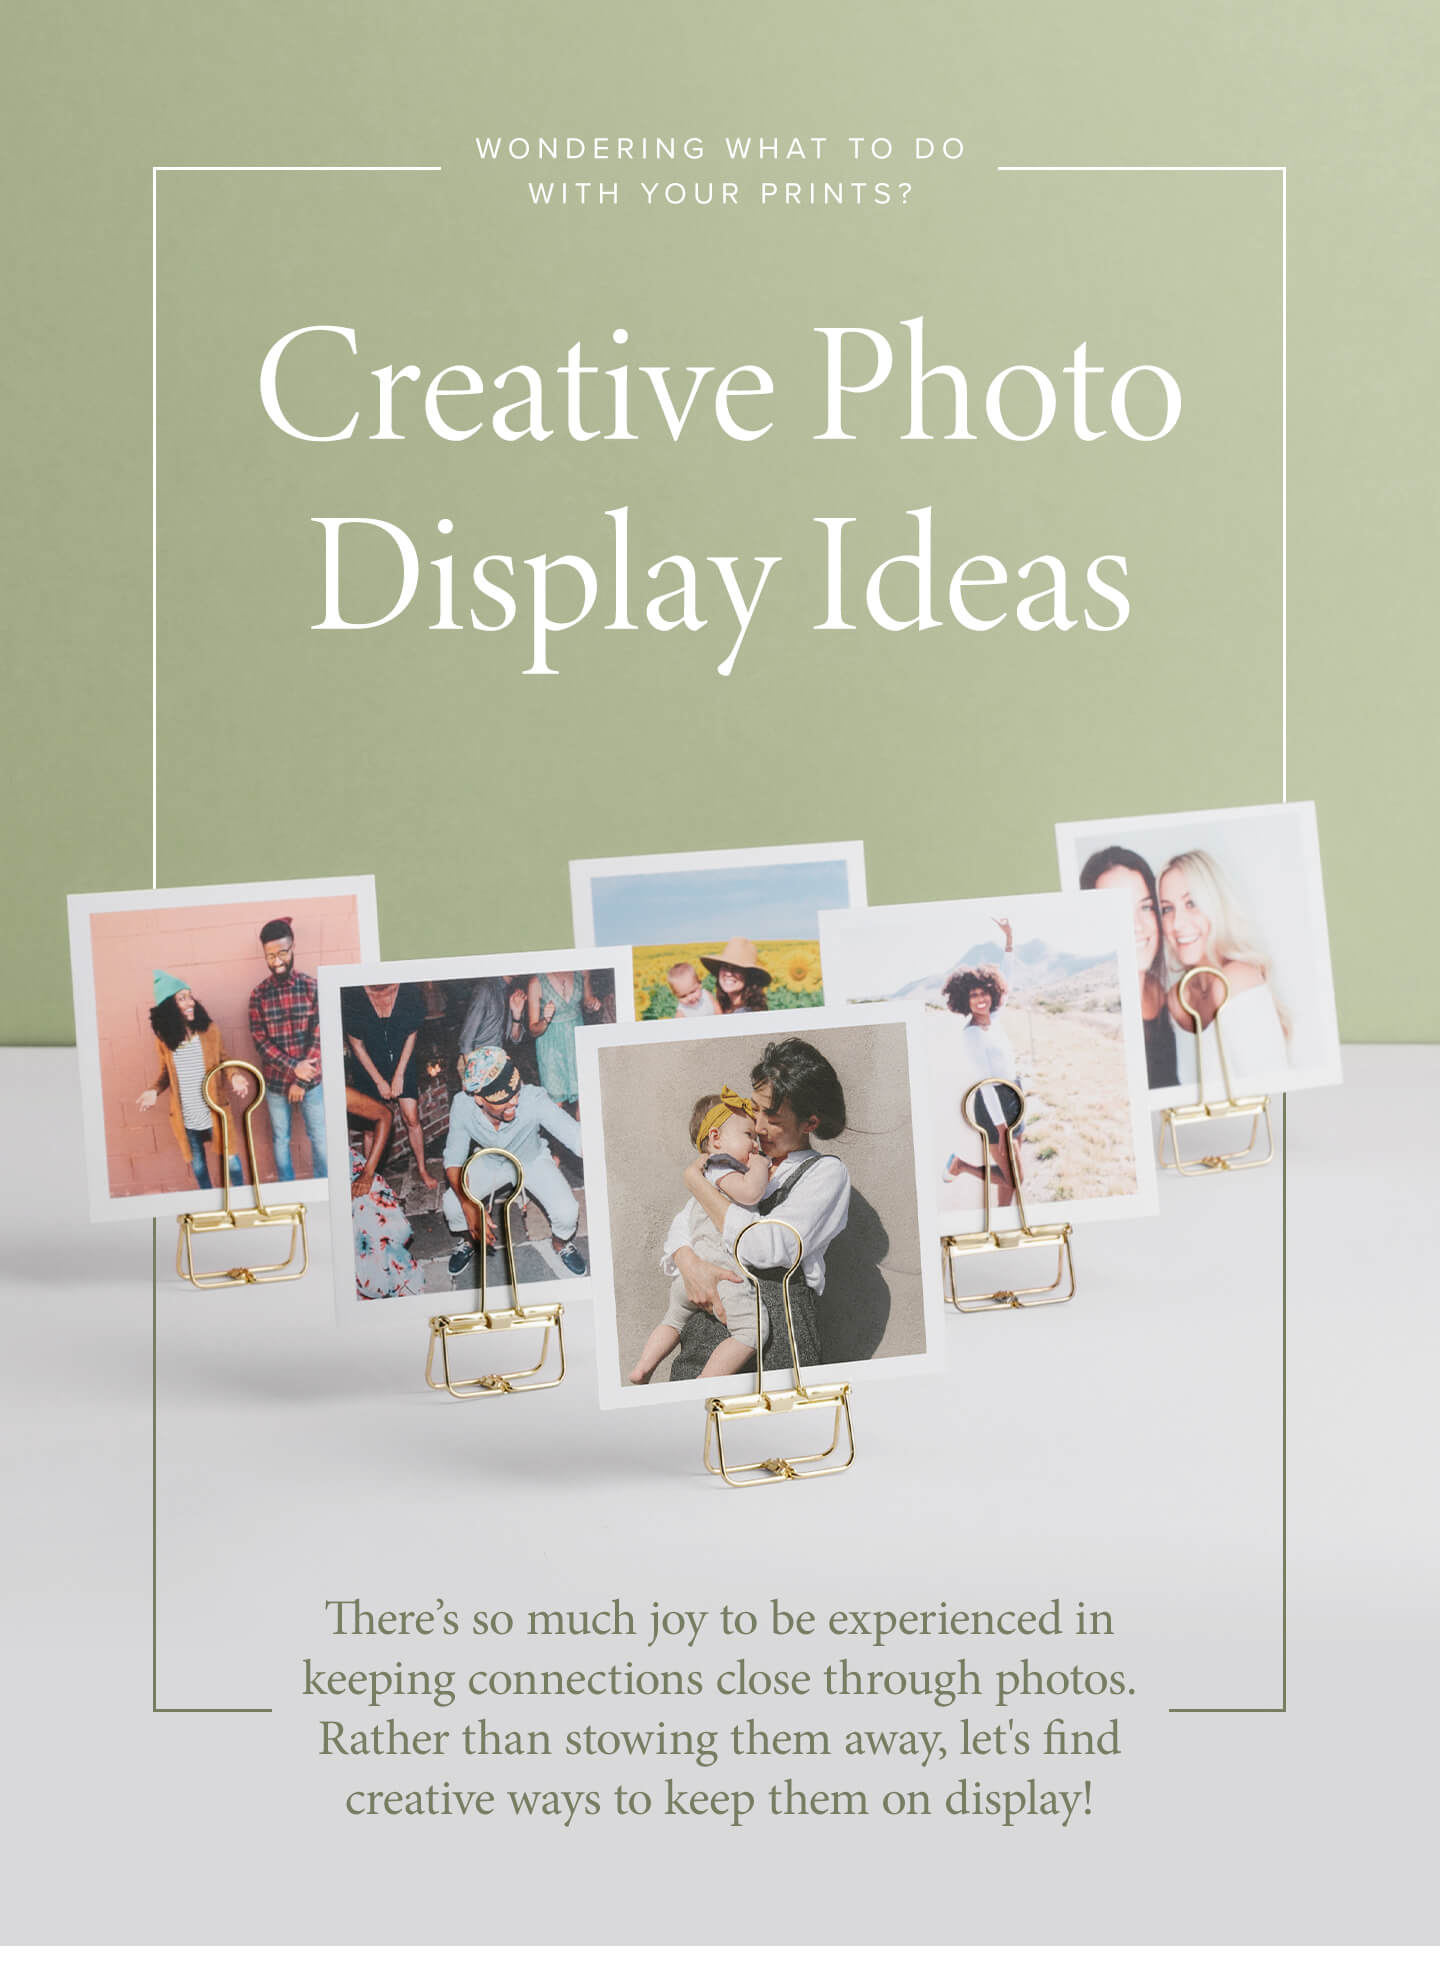 Wondering what to do with your prints? | Creative Photo Display Ideas